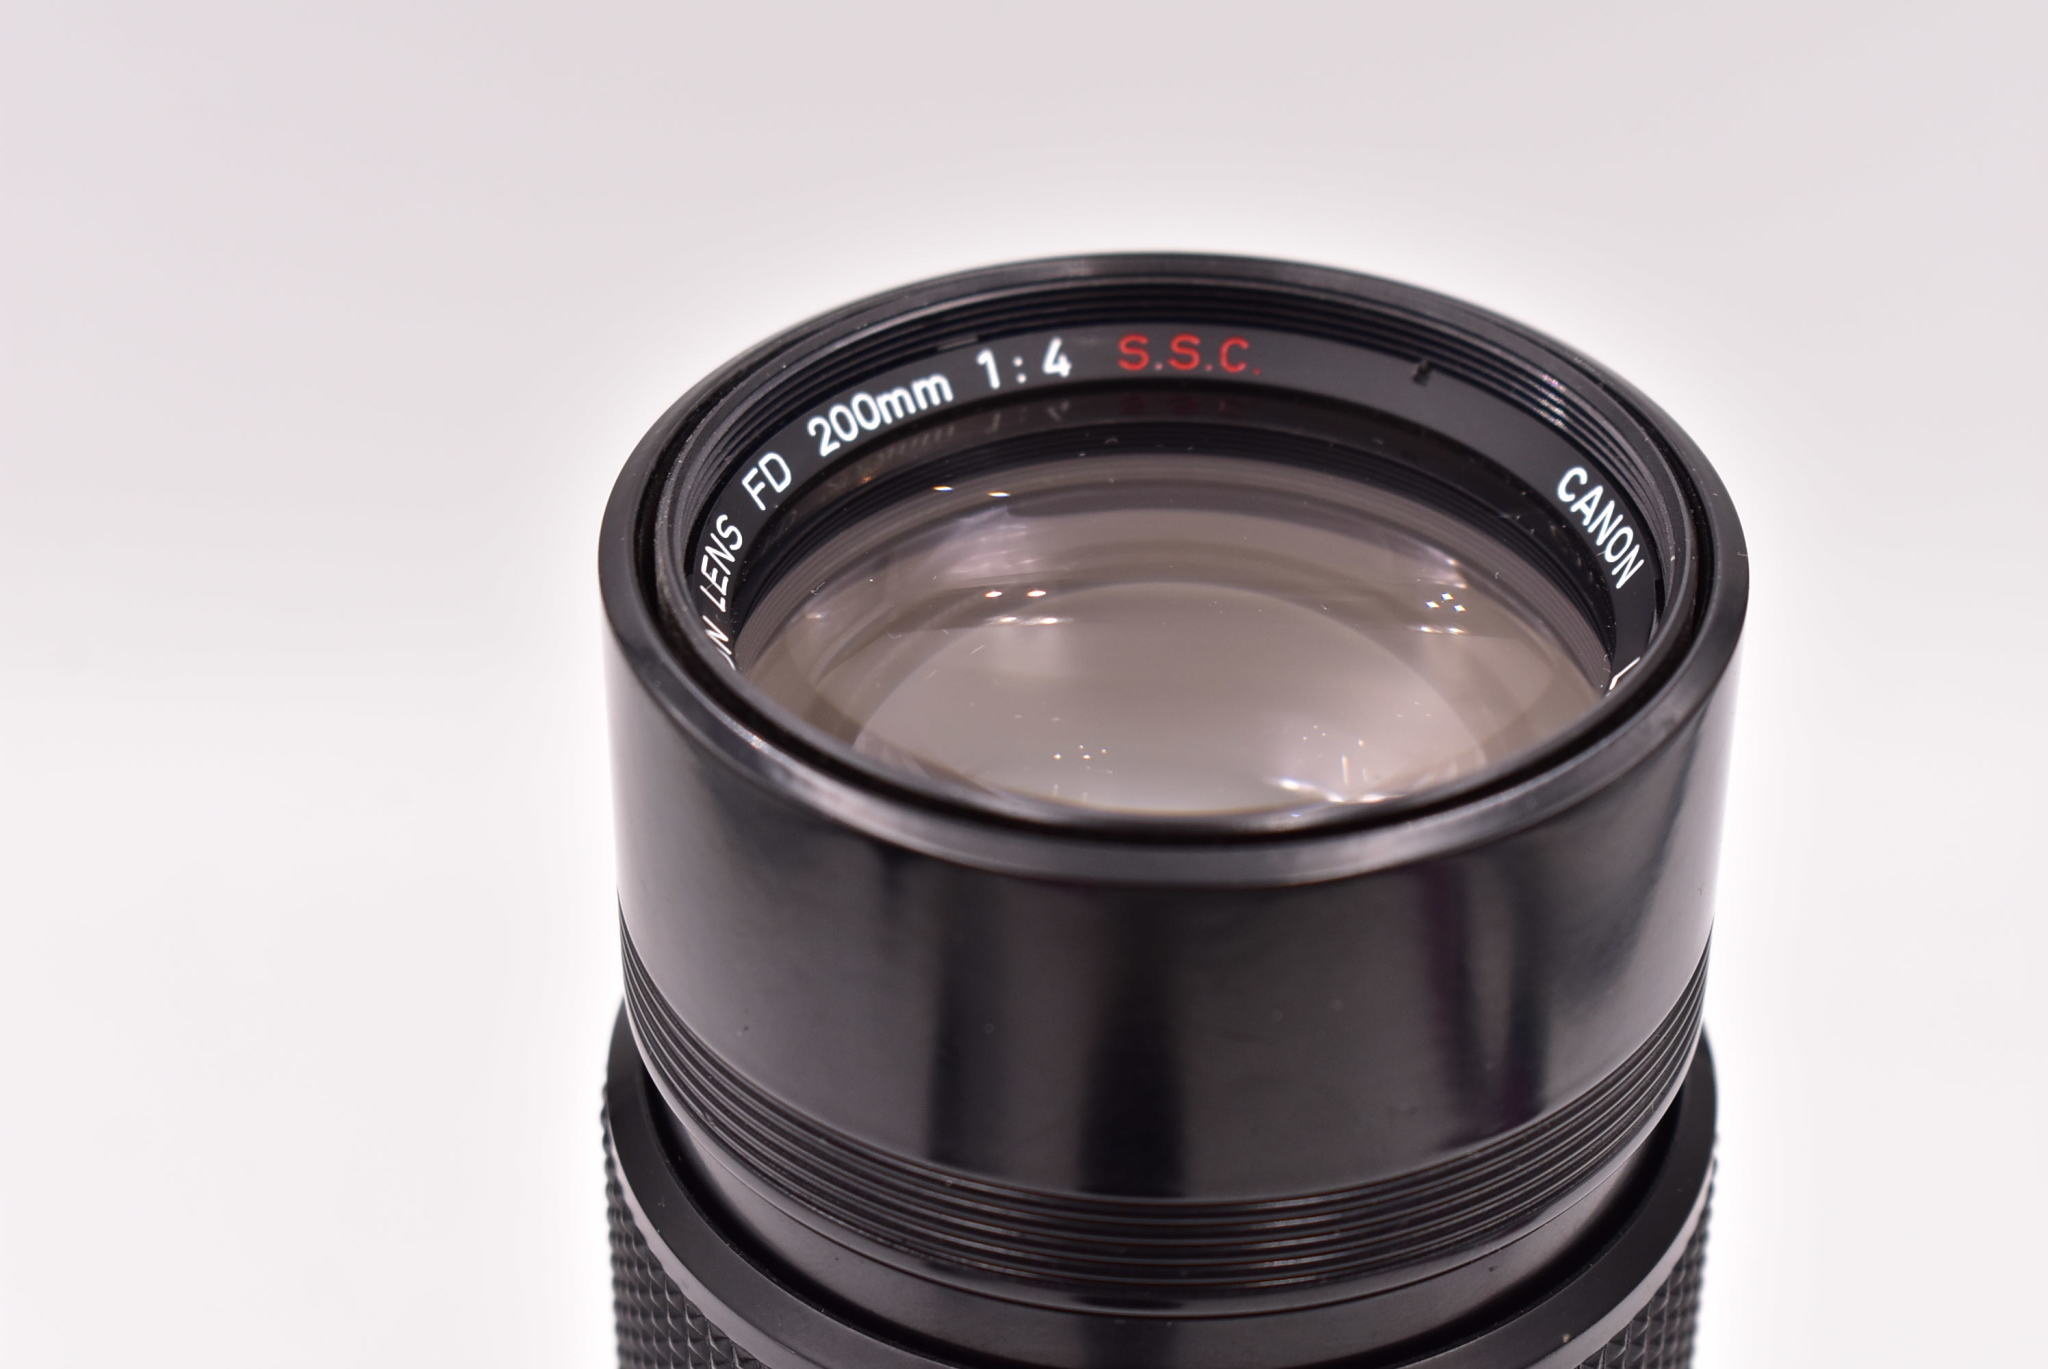 Pre-Owned Canon FD 200mm F4 S.S.C.